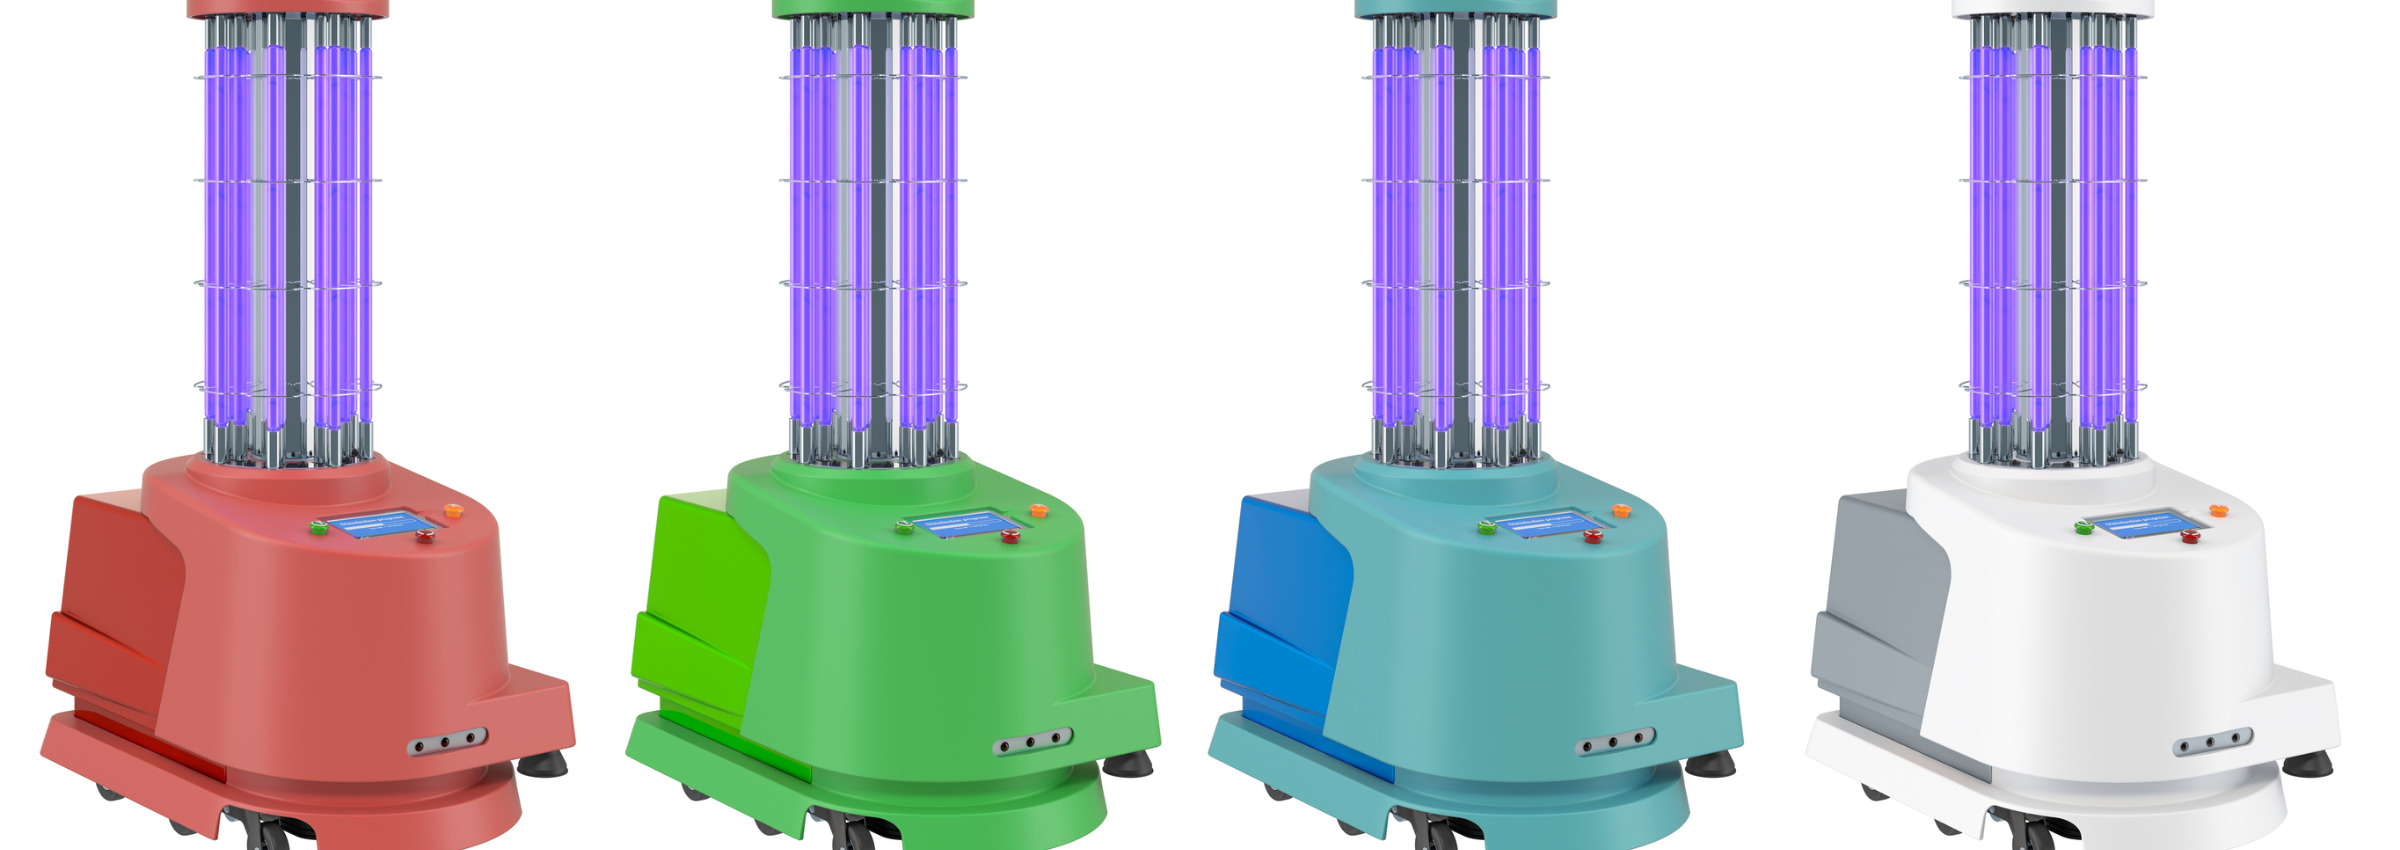 UV Light Disinfection Robot:  Still a Viable, Cost-Effective Solution